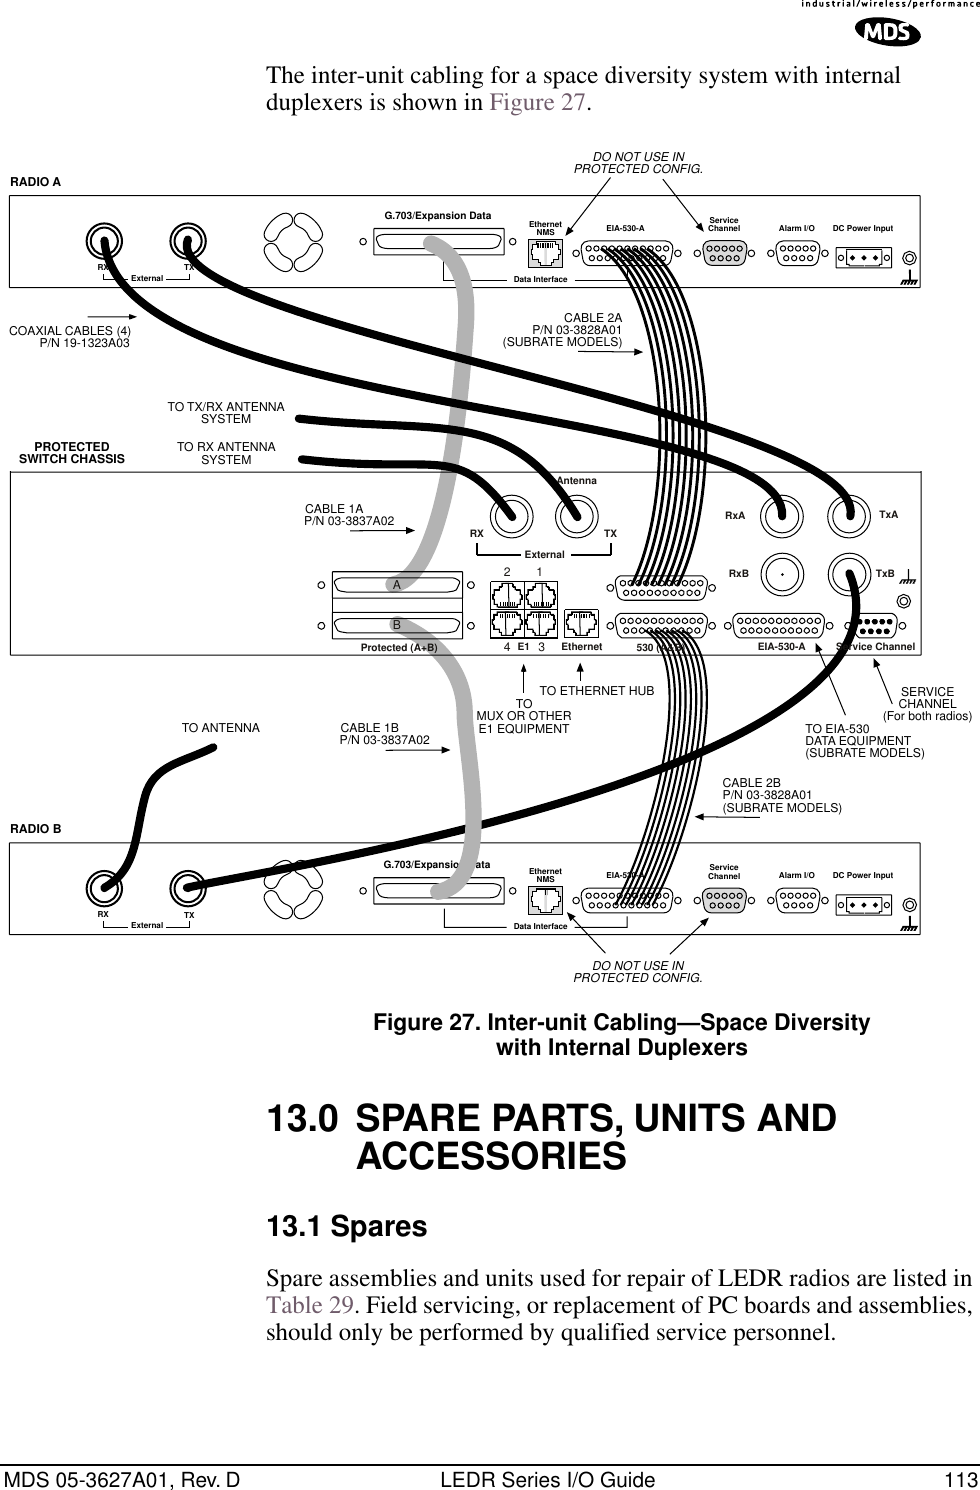 MDS 05-3627A01, Rev. D LEDR Series I/O Guide 113The inter-unit cabling for a space diversity system with internal duplexers is shown in Figure 27. Figure 27. Inter-unit Cabling—Space Diversitywith Internal Duplexers13.0 SPARE PARTS, UNITS AND ACCESSORIES13.1 SparesSpare assemblies and units used for repair of LEDR radios are listed in Table 29. Field servicing, or replacement of PC boards and assemblies, should only be performed by qualified service personnel.DO NOT USE INPROTECTED CONFIG.TXExternal Data InterfaceEIA-530-AEthernetNMSServiceChannel Alarm I/O DC Power InputEIA-530-AEthernetNMSData InterfaceServiceChannel Alarm I/O DC Power InputTO ETHERNET HUB SERVICECHANNEL(For both radios)RXTXExternalRXG.703/Expansion DataG.703/Expansion DataRADIO ARADIO BPROTECTEDSWITCH CHASSISDO NOT USE INPROTECTED CONFIG.CABLE 2AP/N 03-3828A01(SUBRATE MODELS)TO TX/RX ANTENNASYSTEMTOMUX OR OTHERE1 EQUIPMENT TO EIA-530DATA EQUIPMENT(SUBRATE MODELS)CABLE 1AP/N 03-3837A02CABLE 1BP/N 03-3837A02CABLE 2BP/N 03-3828A01(SUBRATE MODELS)AntennaTxATxBRxB530 (A&amp;B)E11234 EIA-530-A Service ChannelEthernetProtected (A+B)ABExternalRX TXRxACOAXIAL CABLES (4)P/N 19-1323A03TO RX ANTENNASYSTEMTO ANTENNA